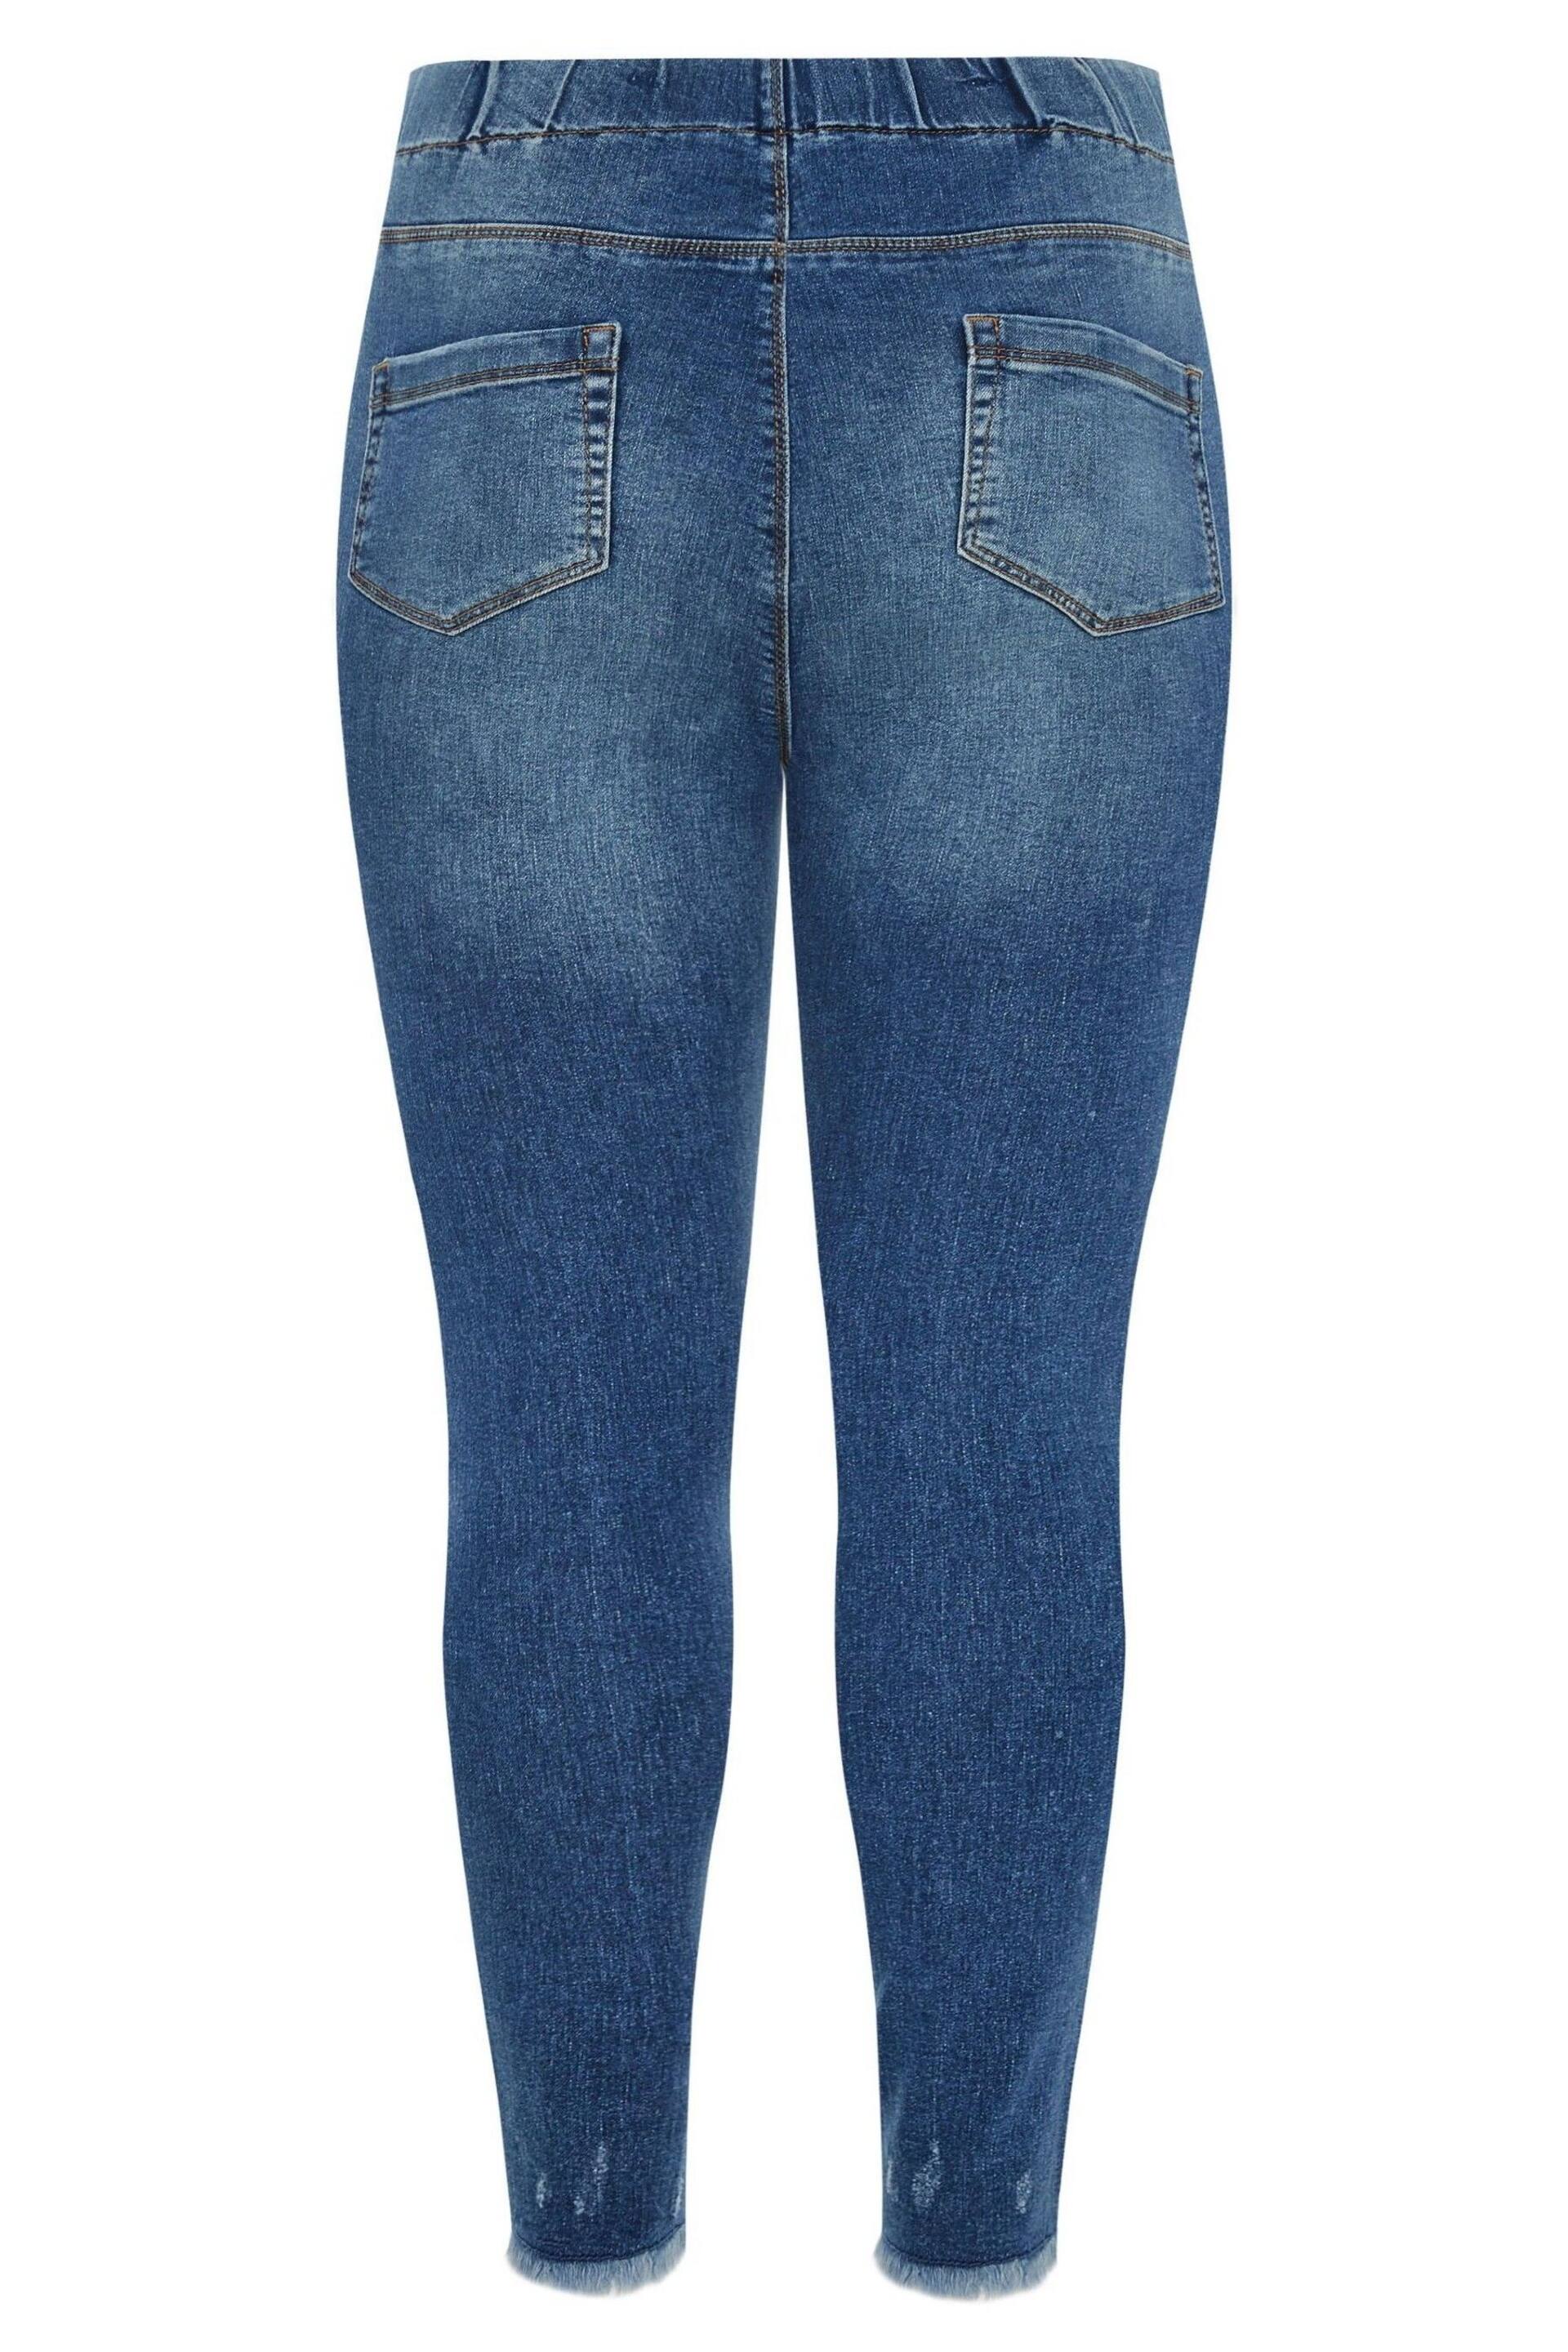 Yours Curve Blue YoursJenny Rip Knee Jeggings - Image 4 of 4